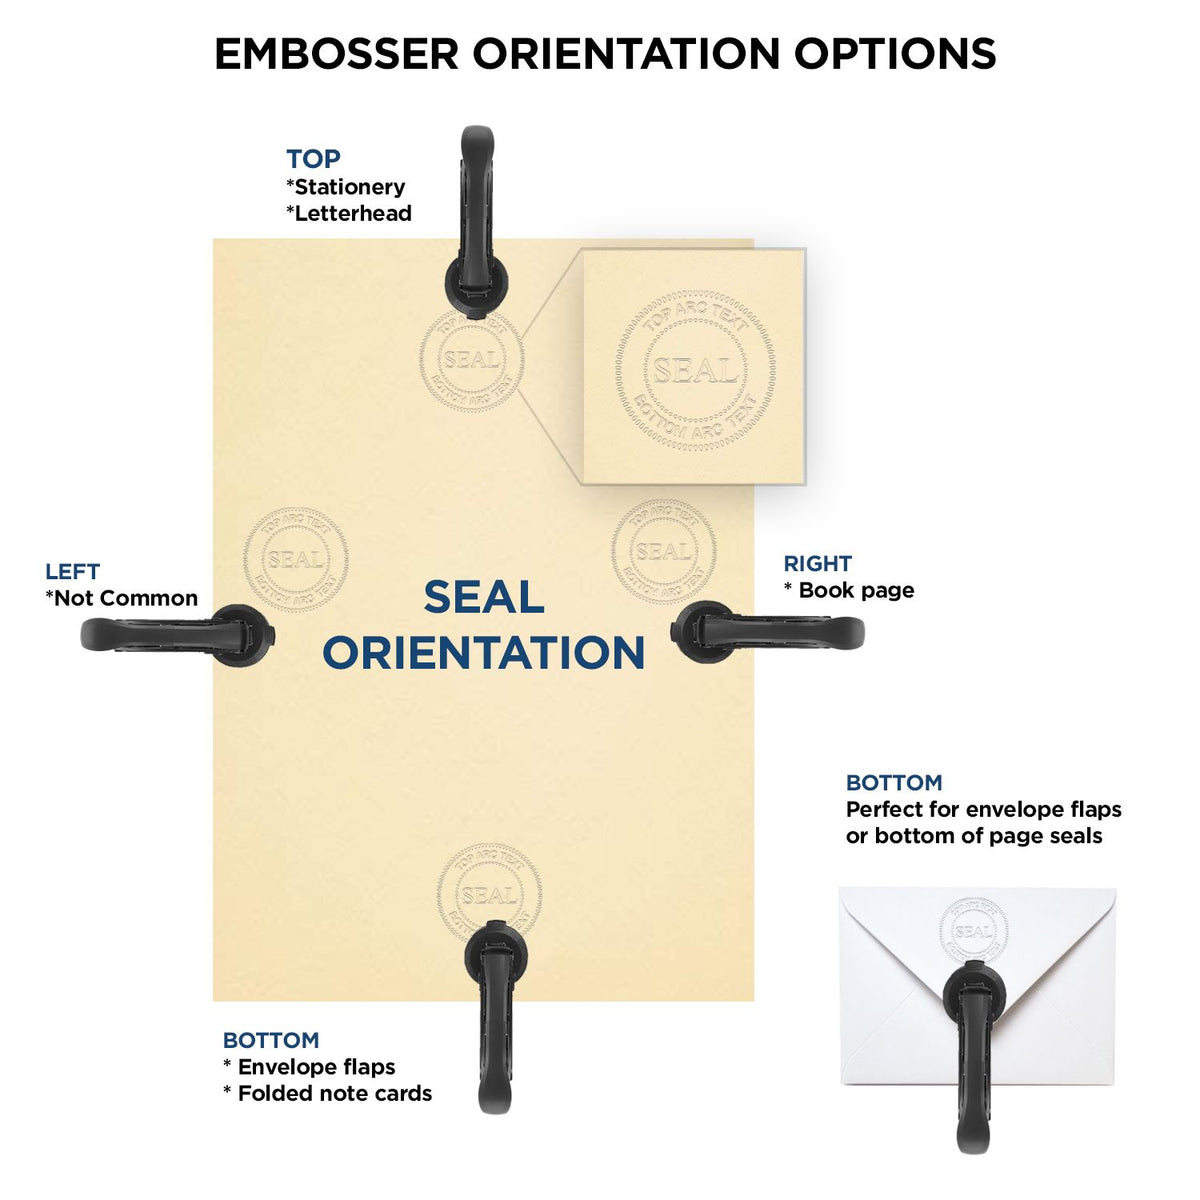 An infographic for the Heavy Duty Cast Iron New Jersey Architect Embosser showing embosser orientation, this is showing examples of a top, bottom, right and left insert.